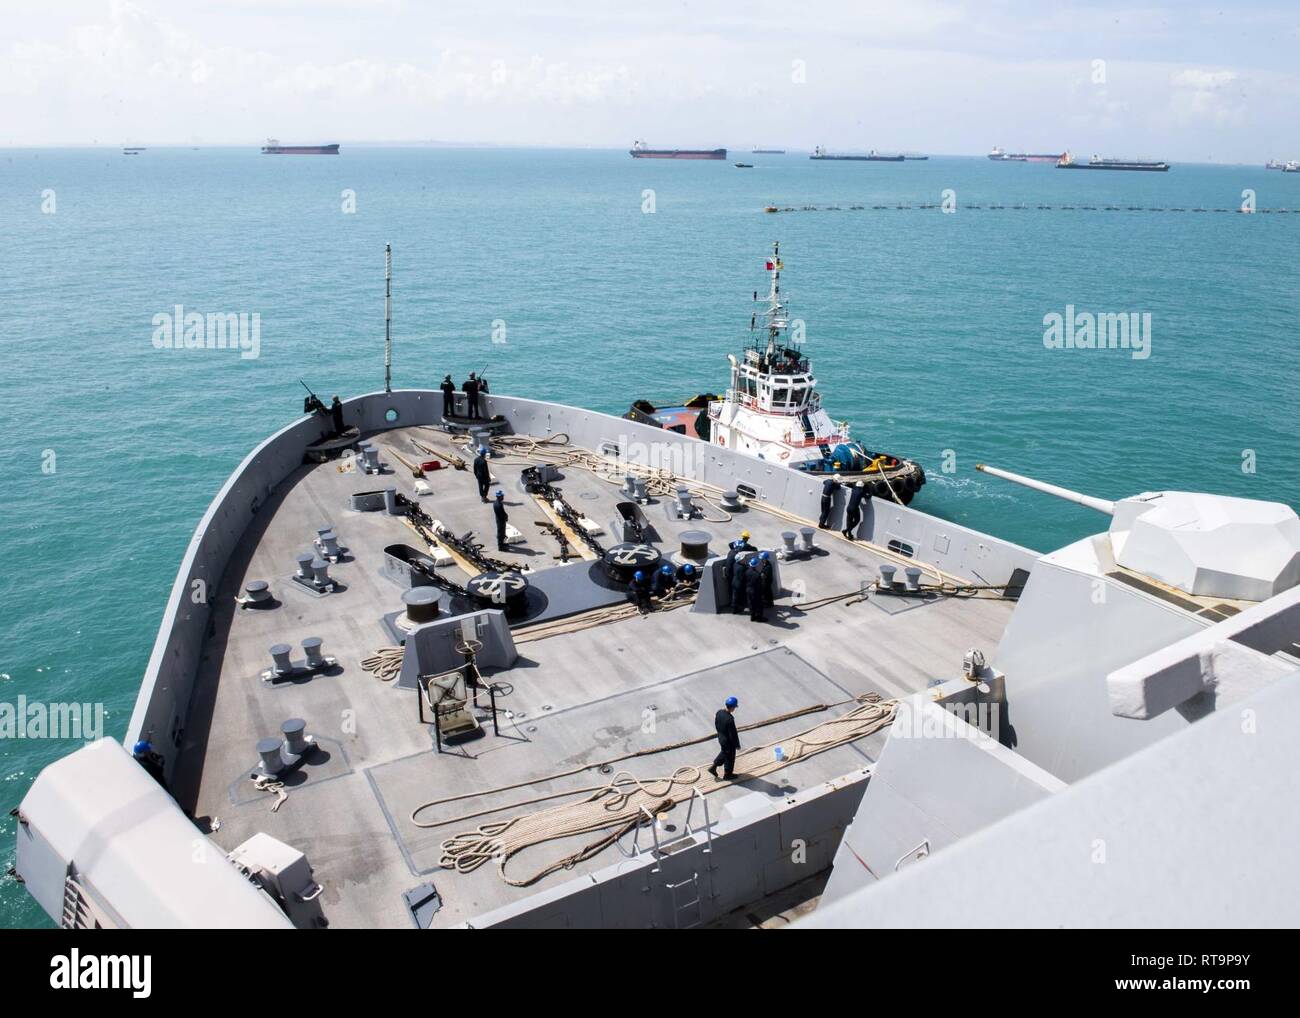 SINGAPORE (Jan. 31, 2019) The San Antonio-class amphibious transport dock ship USS Anchorage (LPD 23) departs Changi Naval Base, Singapore, while on a deployment of the Essex Amphibious Ready Group (ARG) and 13th Marine Expeditionary Unit (MEU). The Essex ARG/13th MEU is a capable and lethal Navy-Marine Corps team deployed to the 7th fleet area of operations to support regional stability, reassure partners and allies and maintain a presence postured to respond to any crisis ranging from humanitarian assistance to contingency operations. Stock Photo